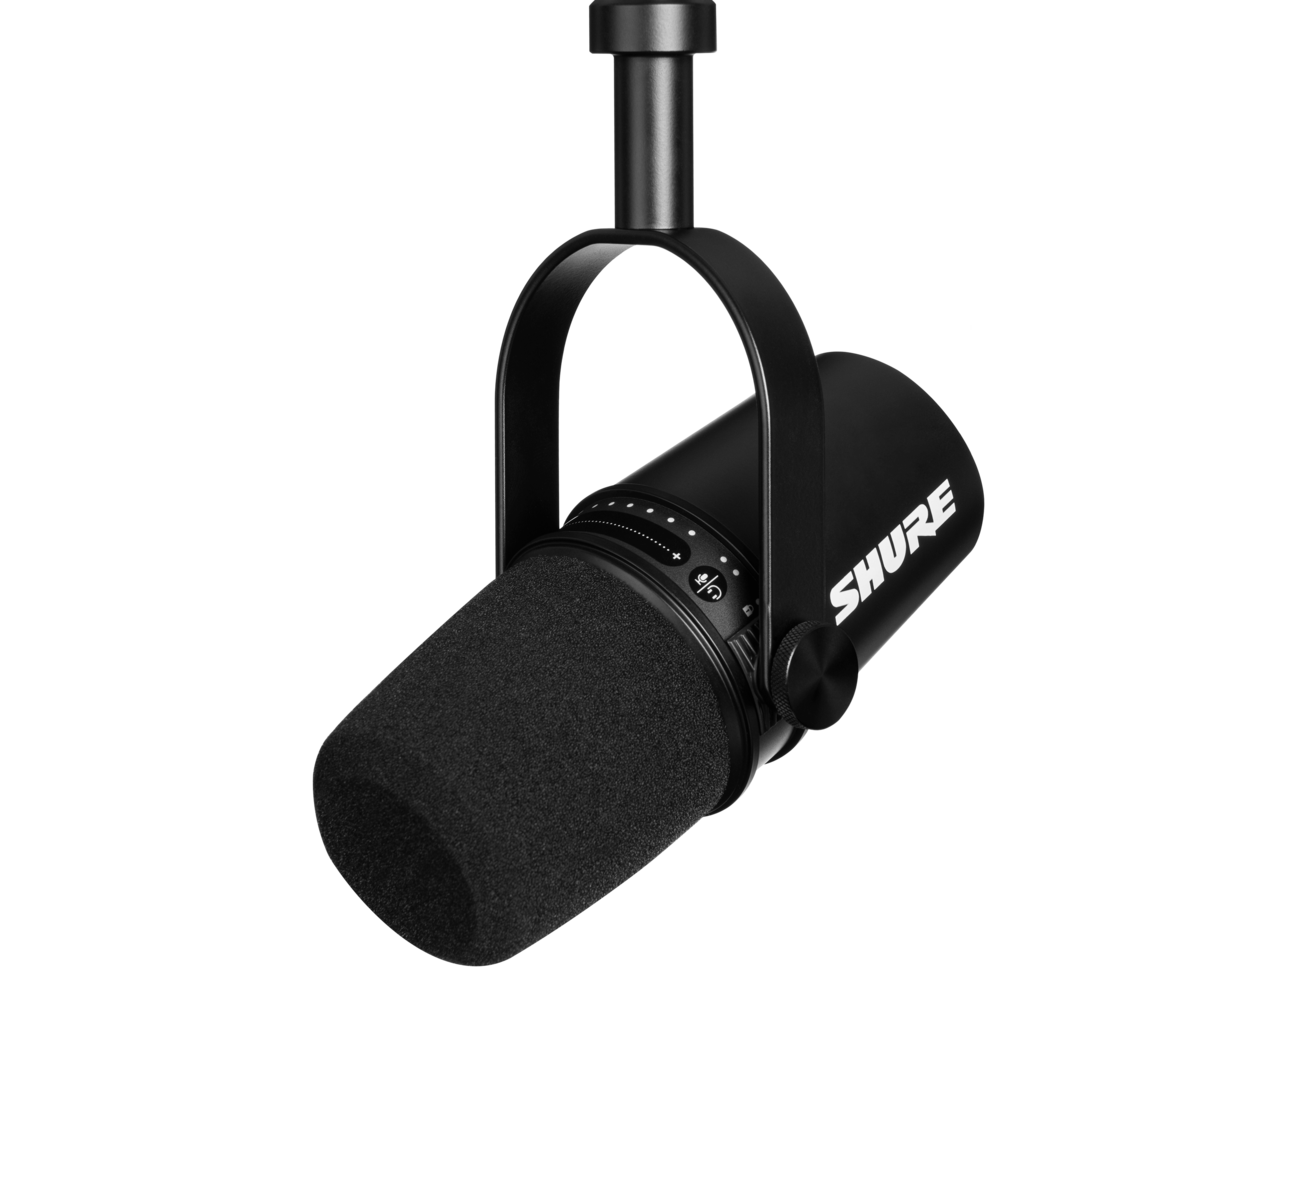 Front right of Shure MV7 USB Podcast Microphone.